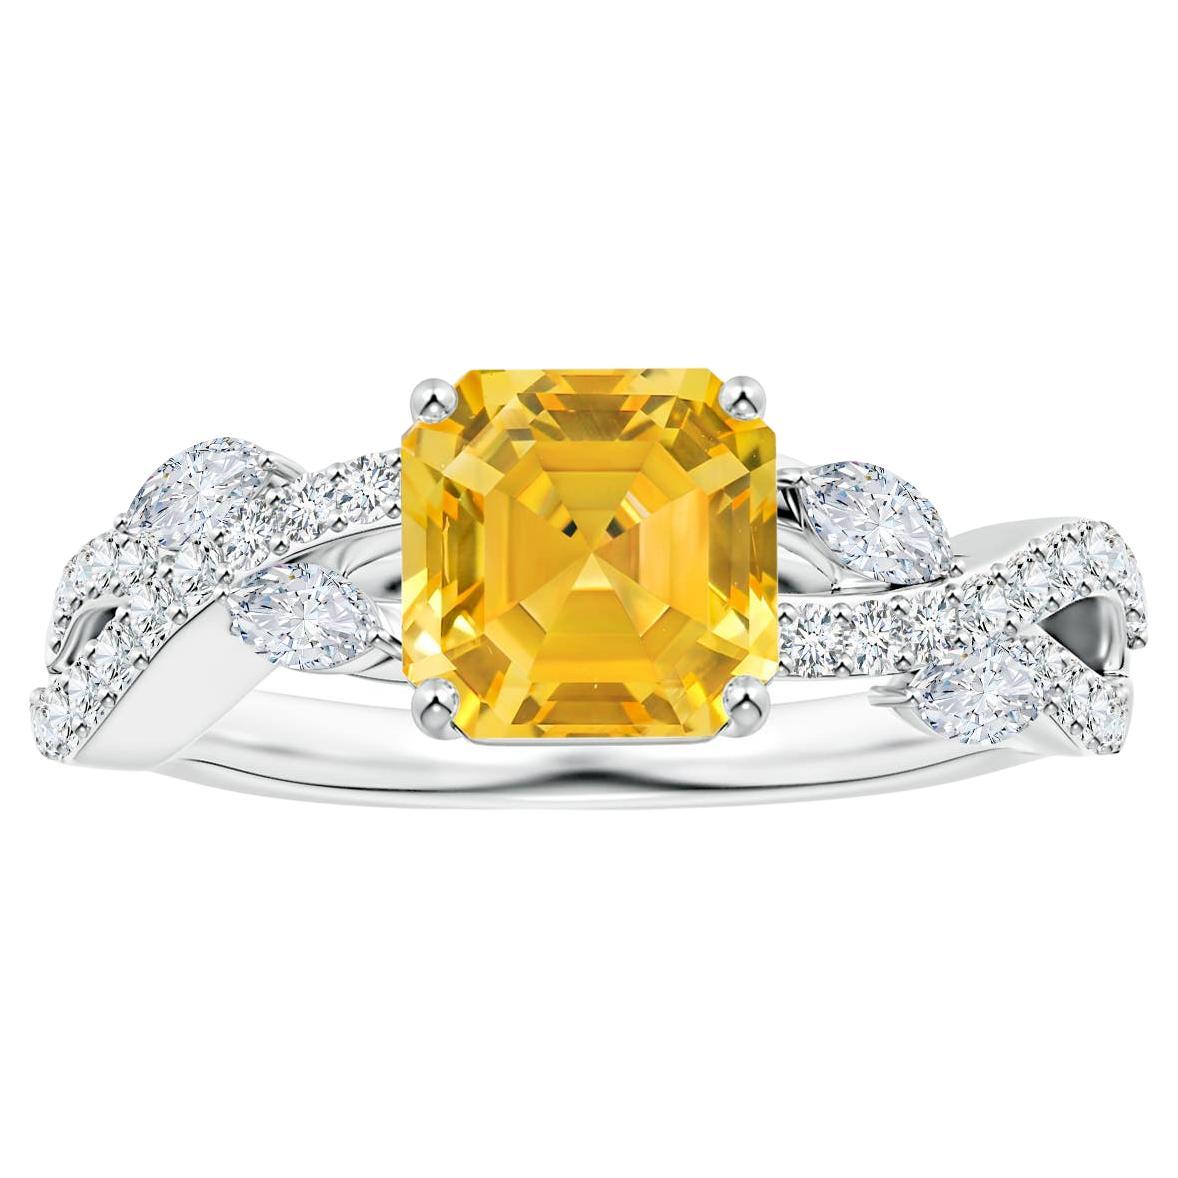 For Sale:  Angara Gia Certified Emerald-Cut Yellow Sapphire Diamond Ring in White Gold